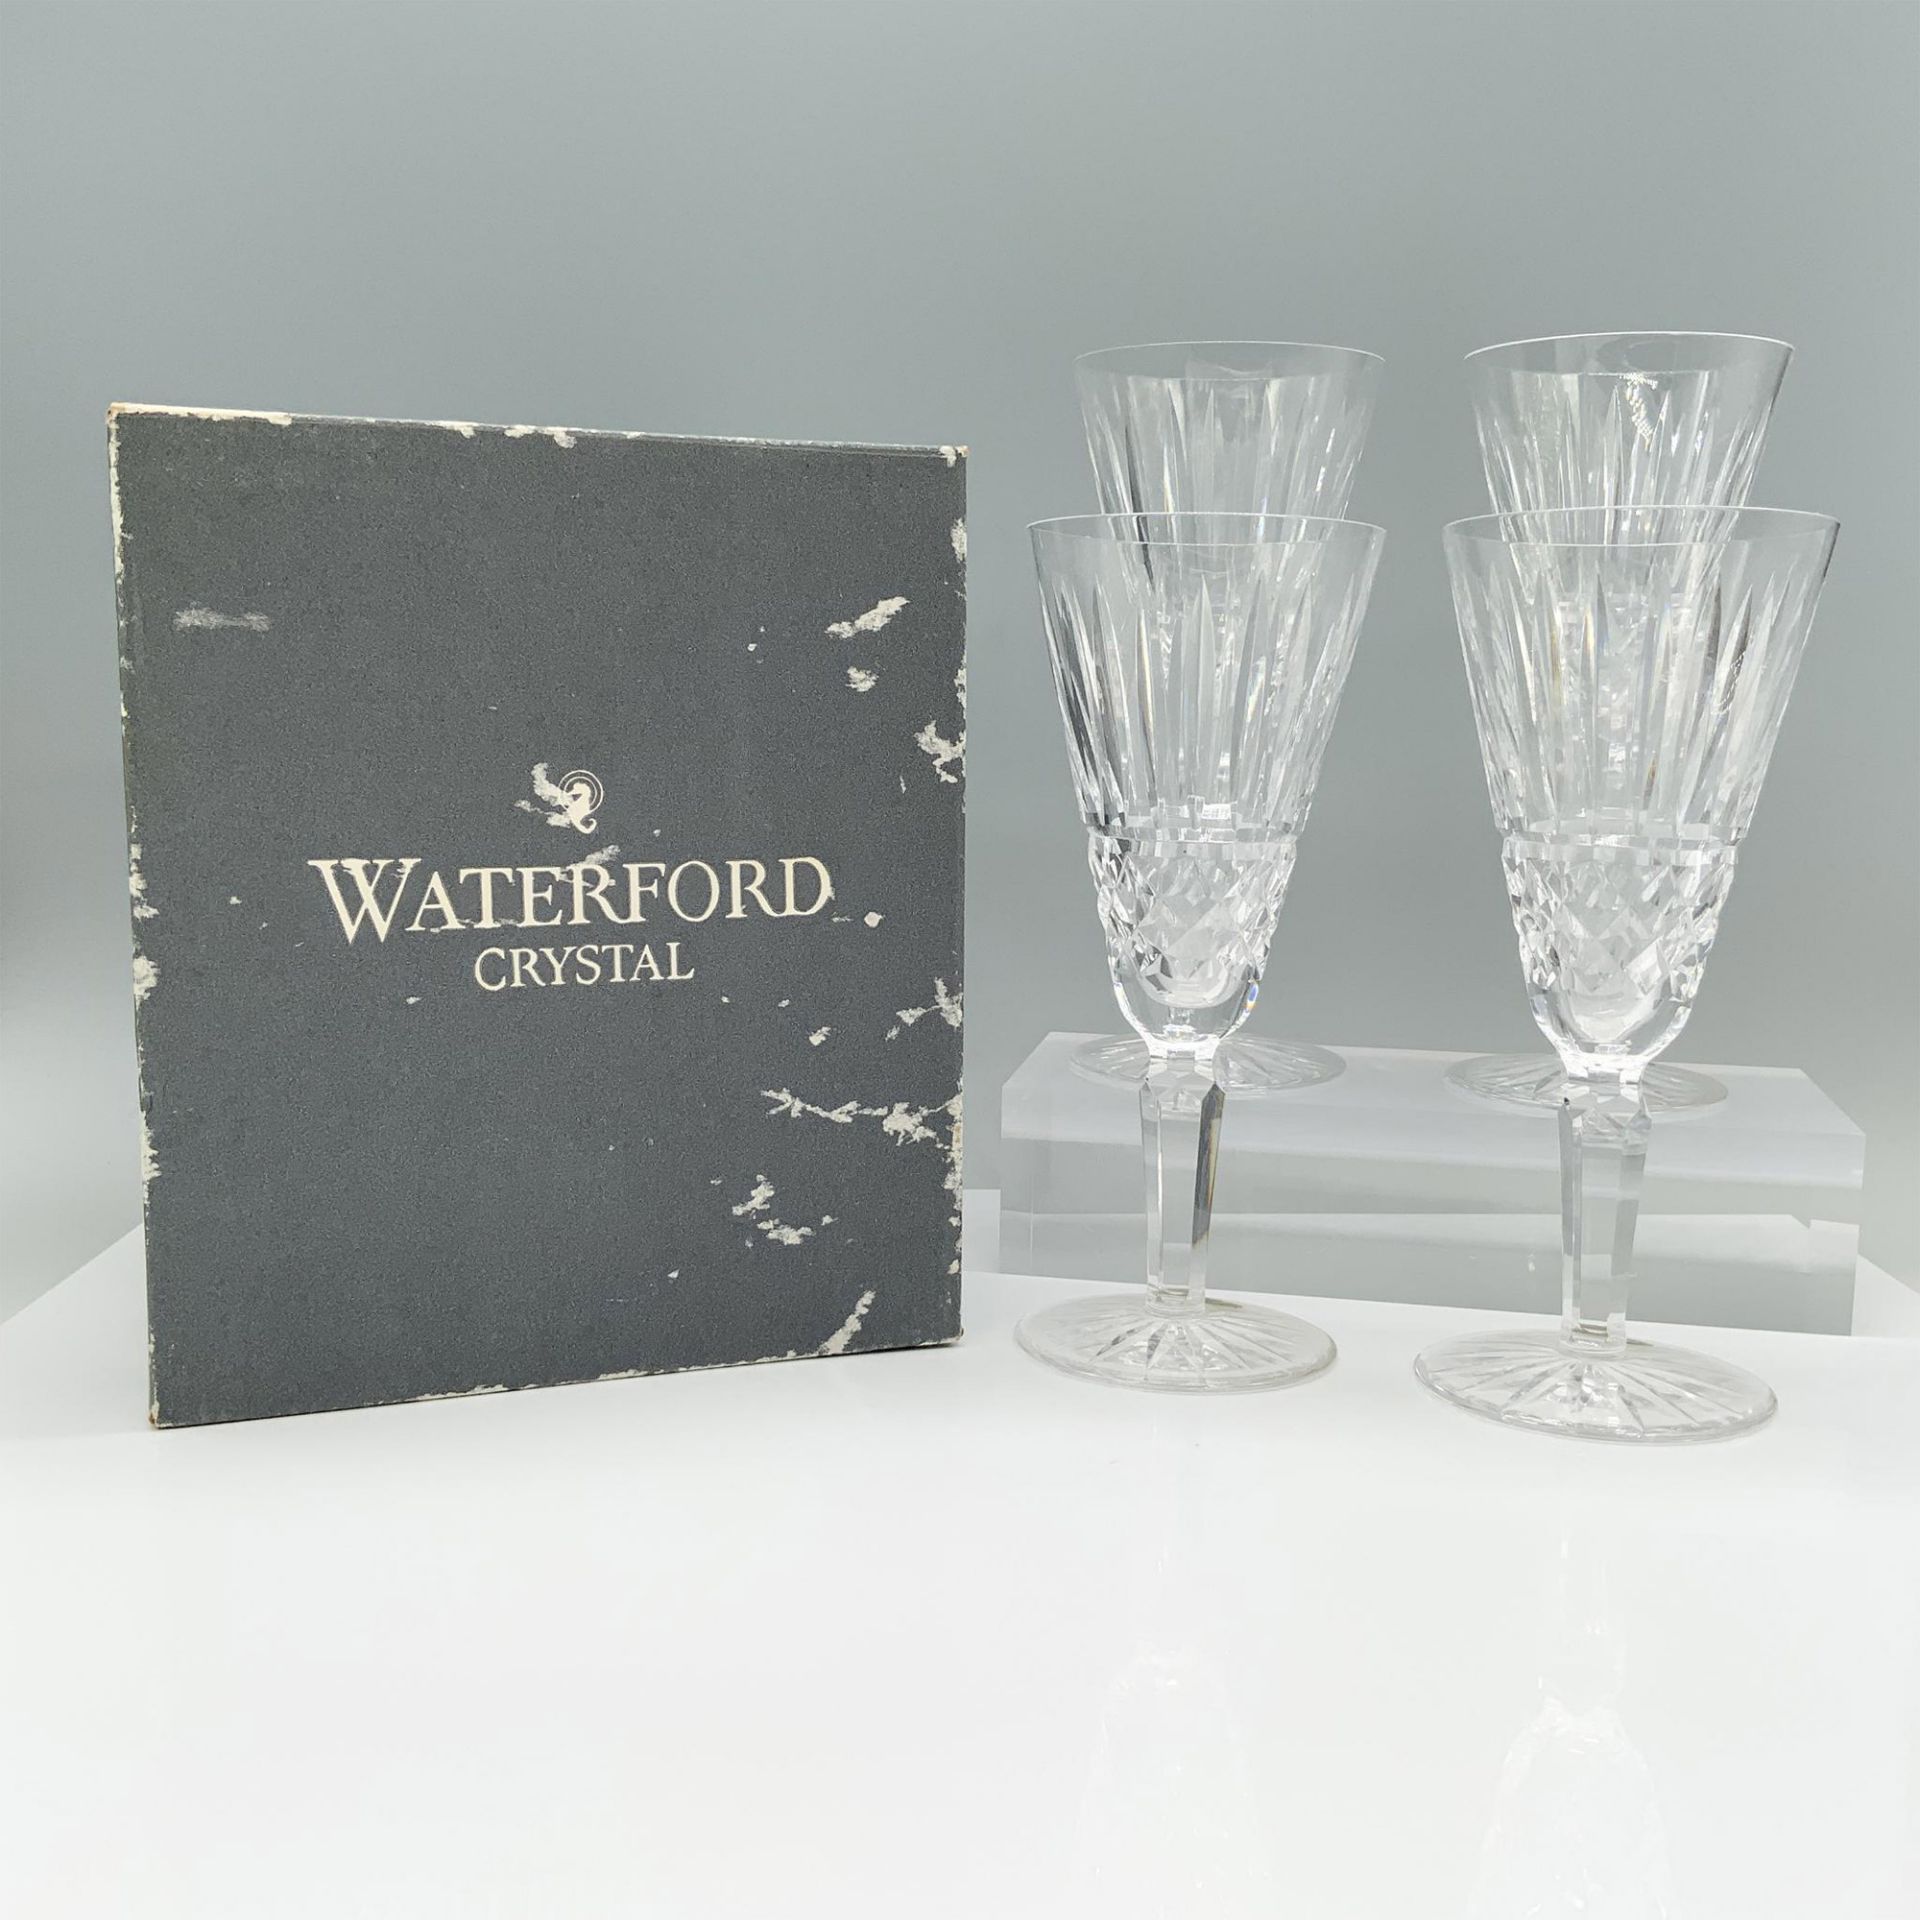 4pc Waterford Crystal Flute Champagne Glasses, Maeve - Image 4 of 4